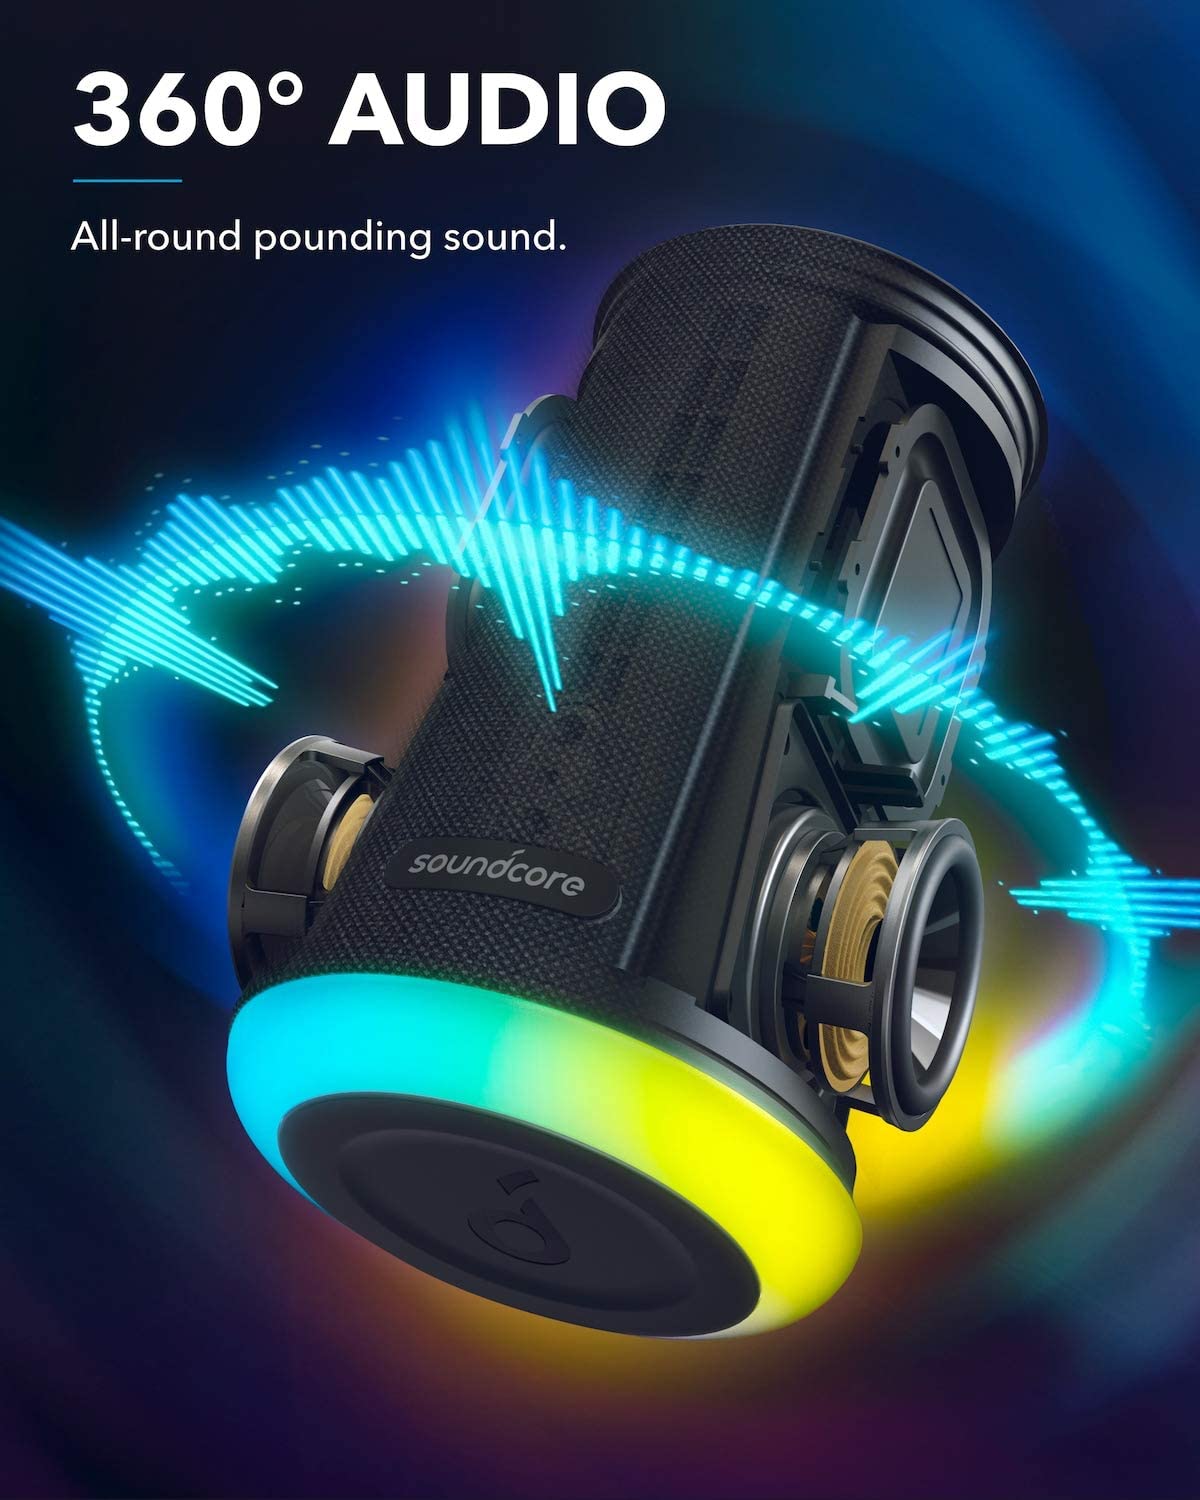 Soundcore Flare Mini Bluetooth Speaker With 360° Sound and BassUp Technology